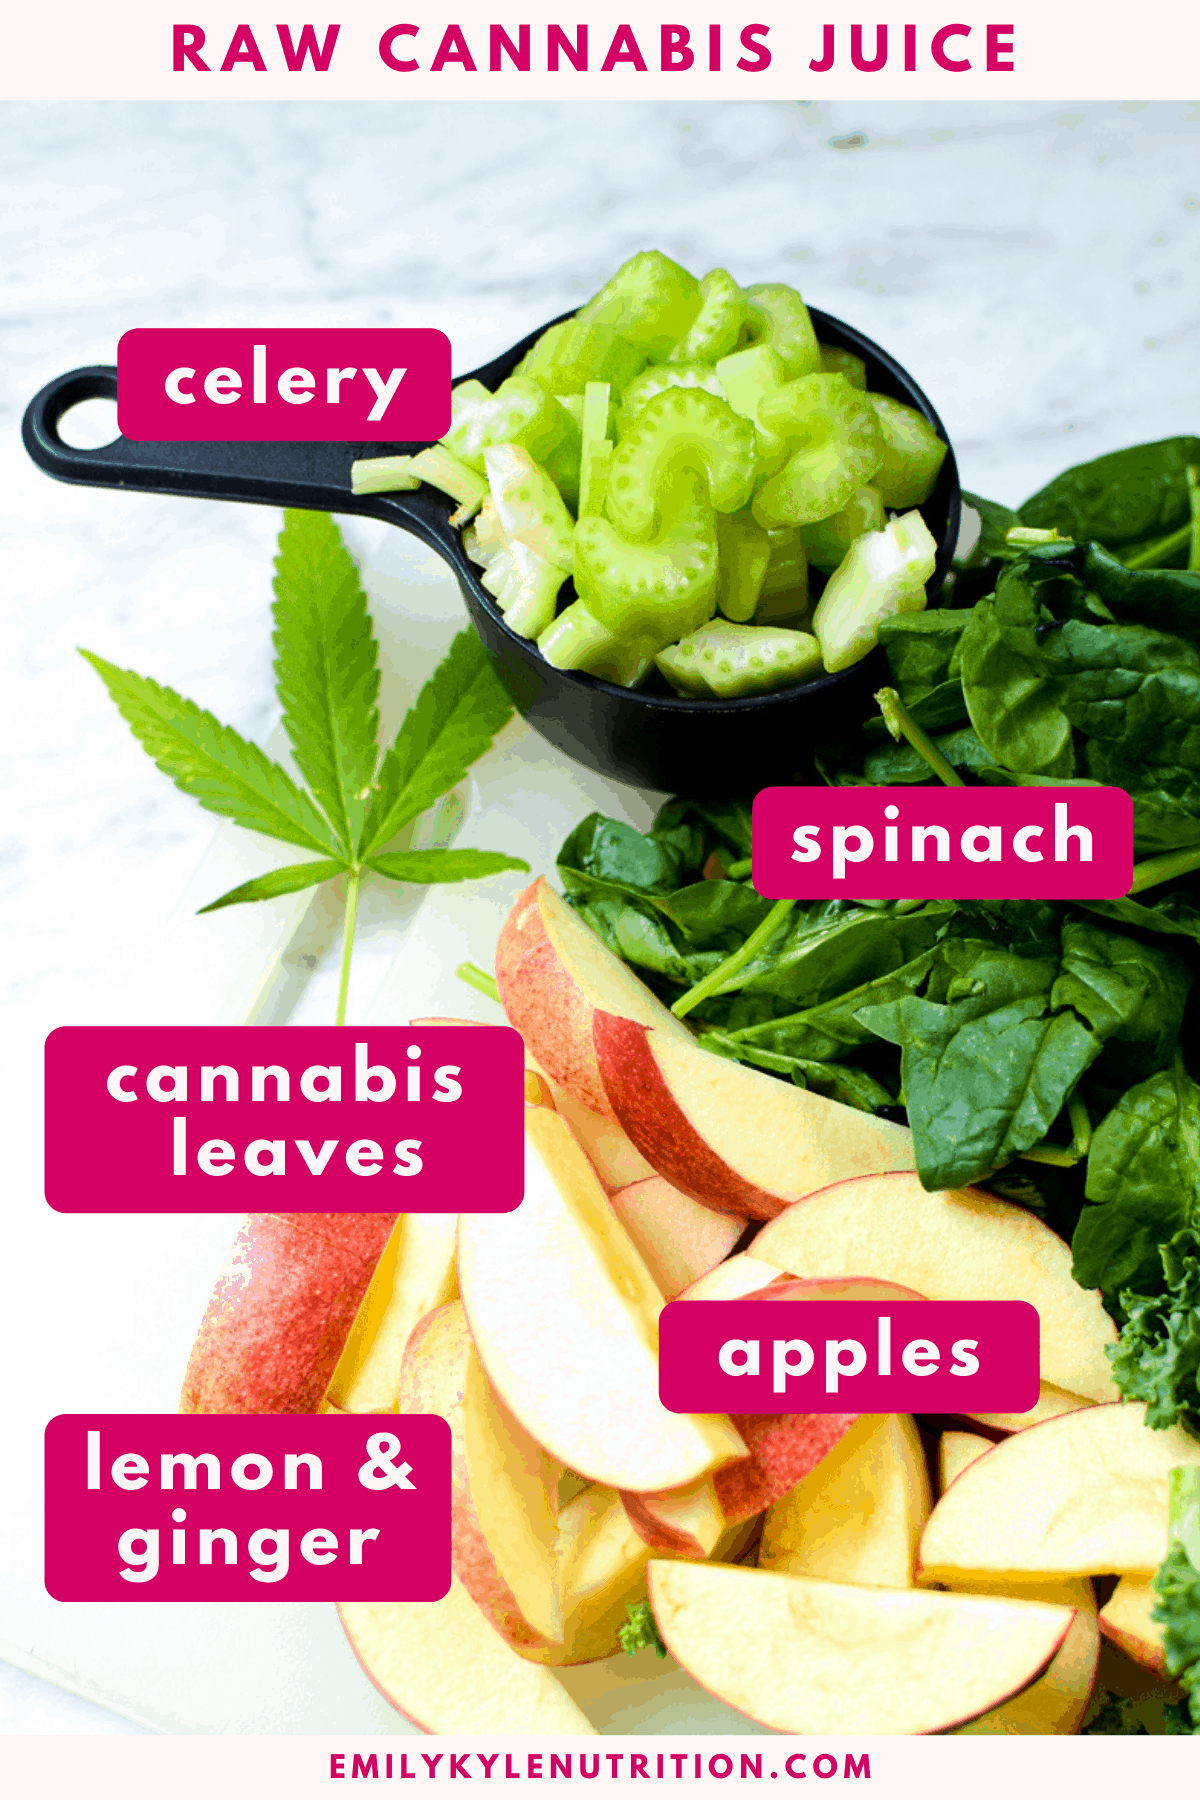 The ingredients needed to make cannabis juice including cannabis leaves, spinach, apples, lemon and ginger